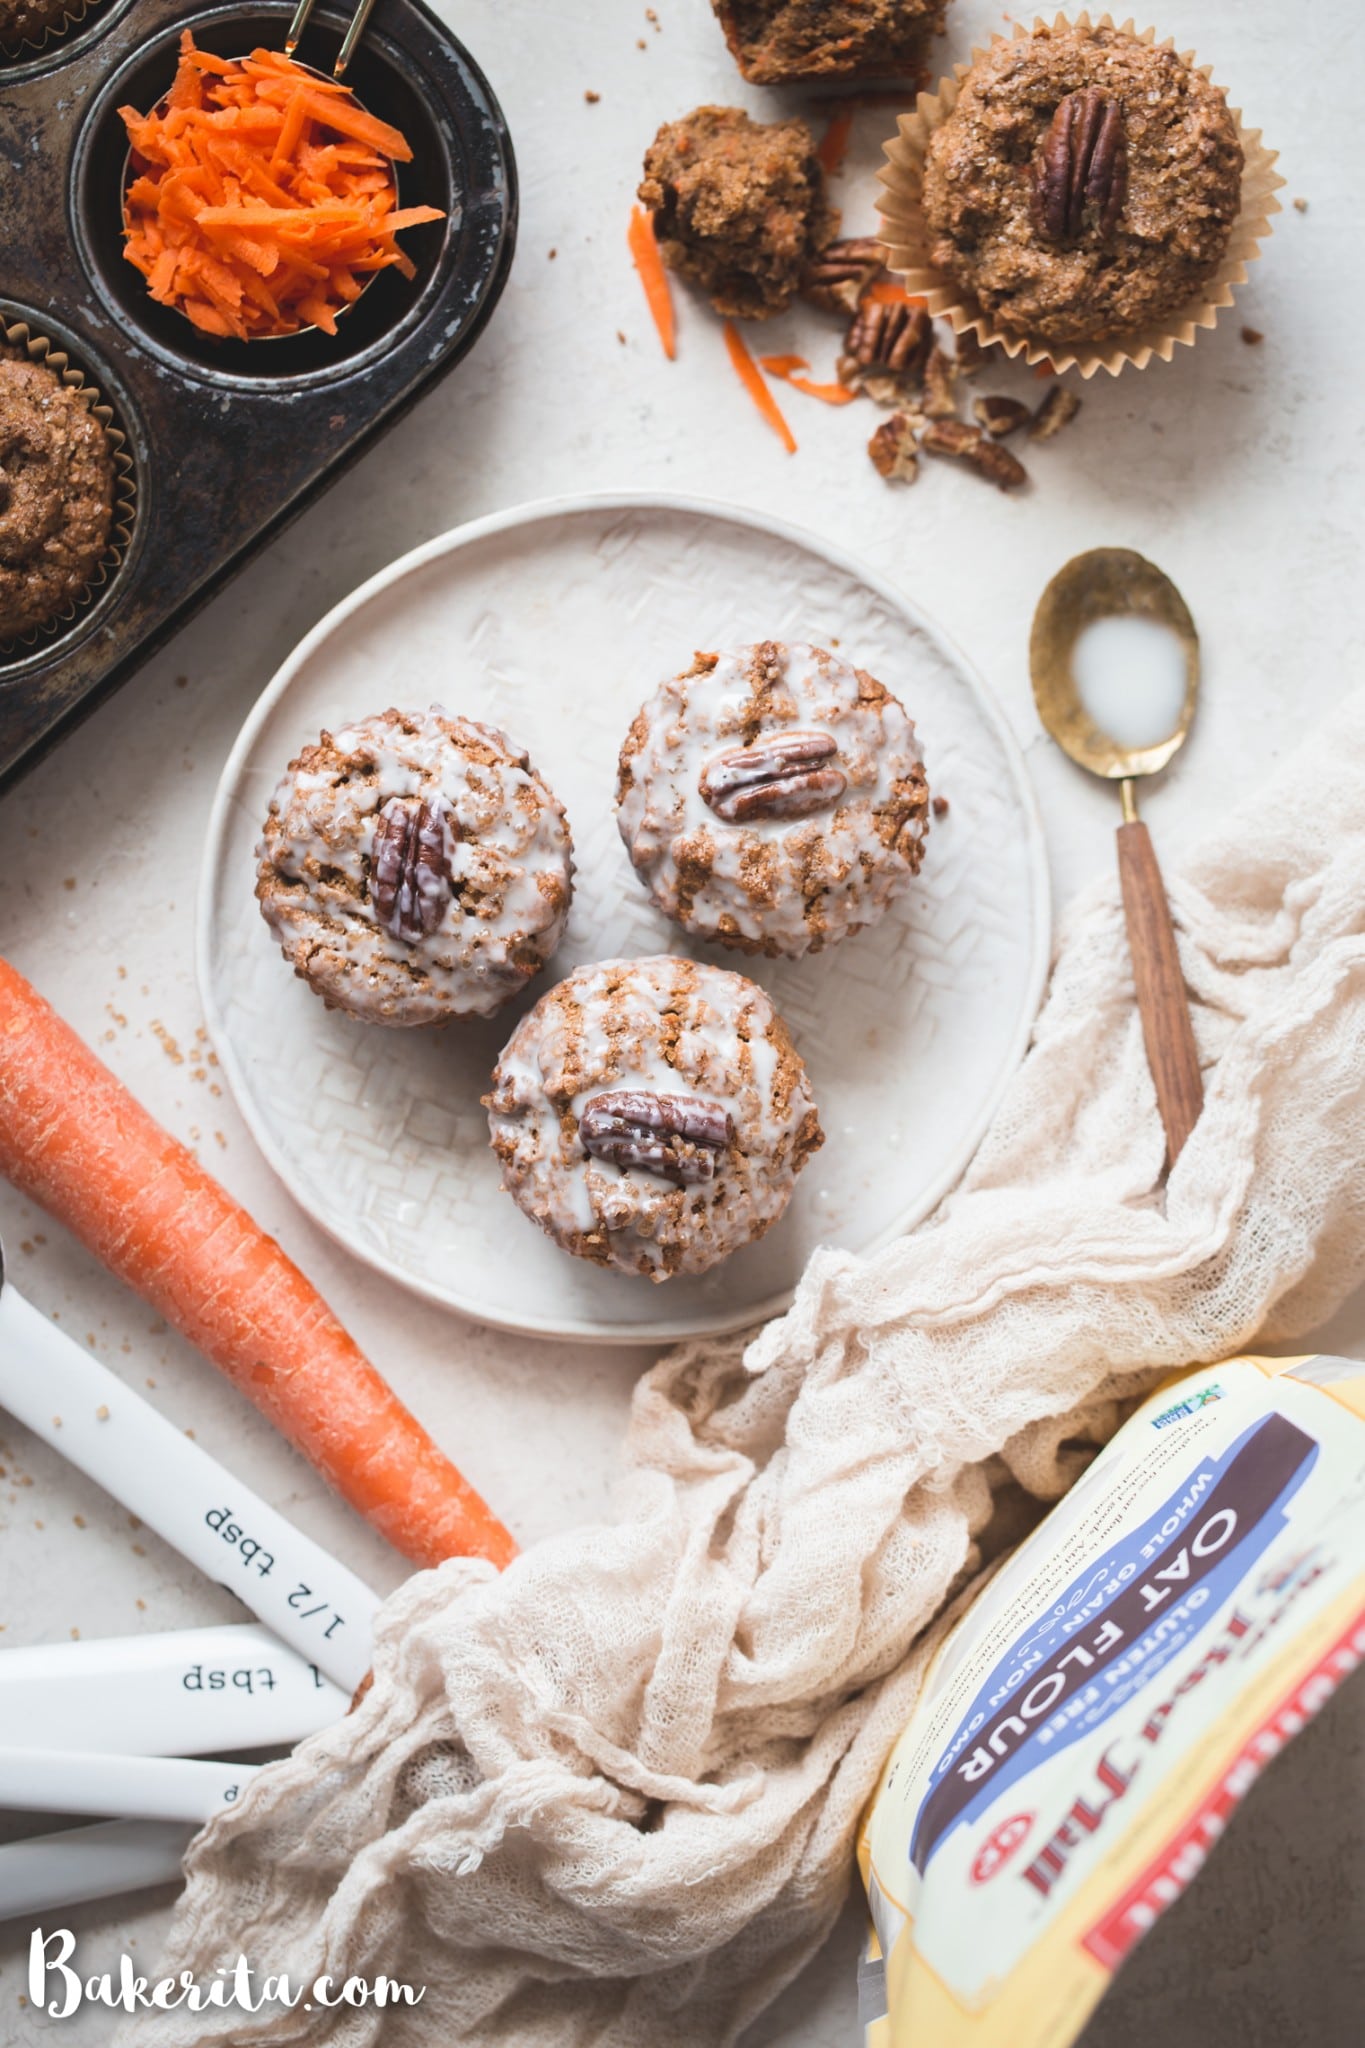 These Gluten-Free Vegan Carrot Cake Muffins are so tender and flavorful! They're the perfect healthy breakfast or snack to enjoy all year long. You'll love these simple carrot muffins!